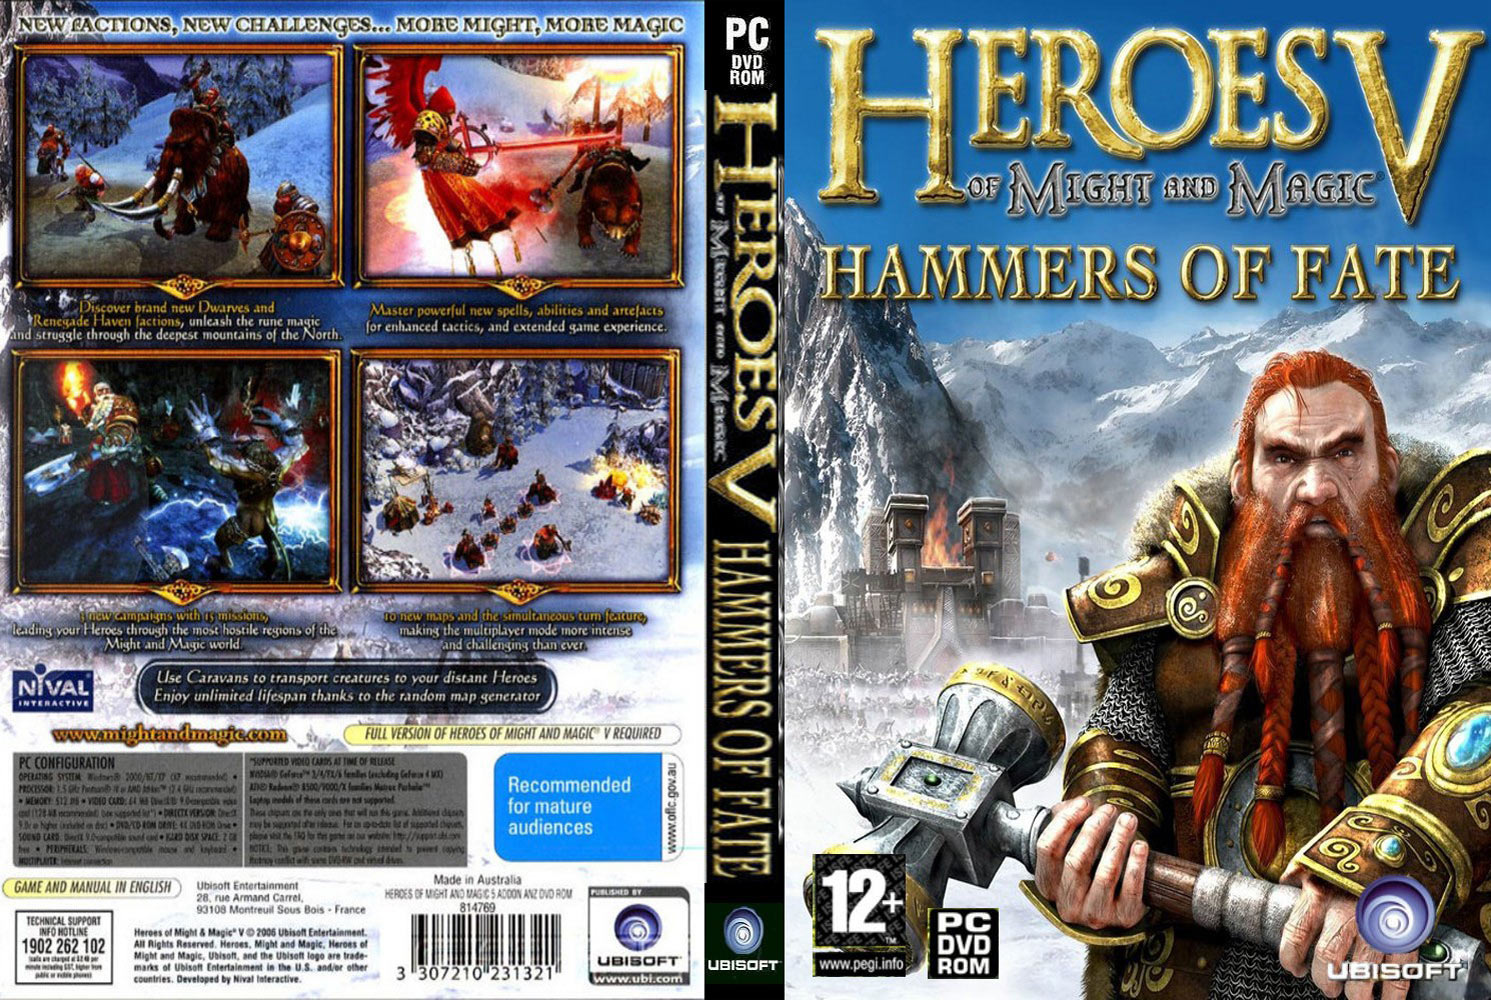 Heroes of might and magic русификатор. Герои 5 Hammers of Fate. Heroes of might and Magic 5 обложка. Heroes of might and Magic v Hammers of Fate. HOMM 5 Hammers of Fate.